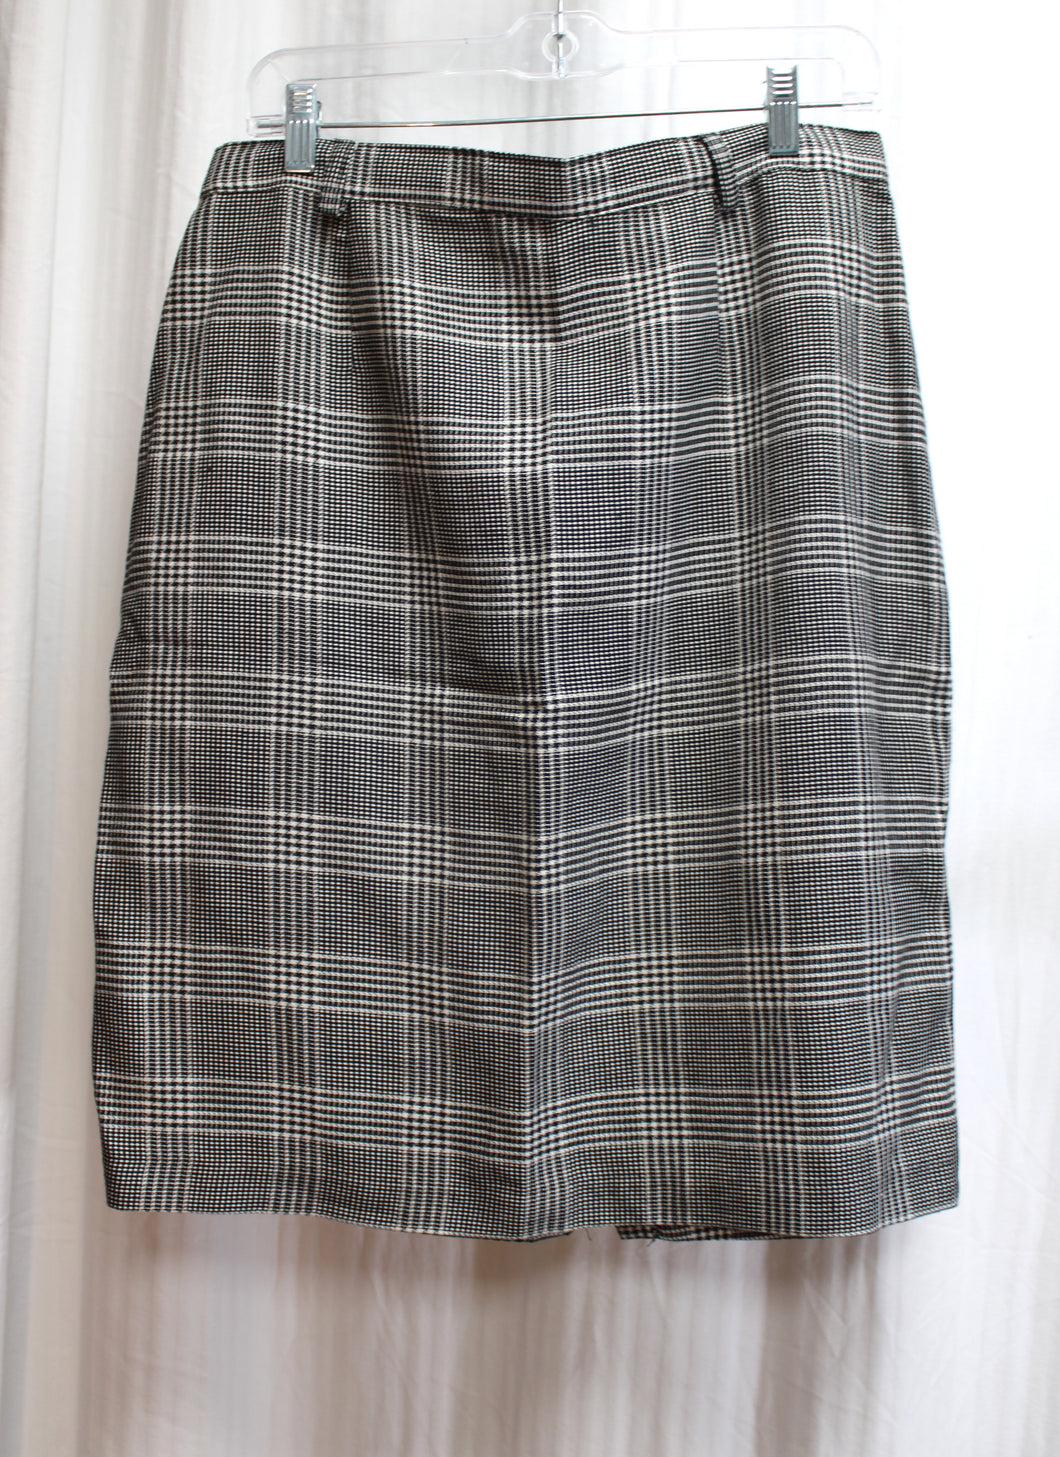 Vintage - Bentley - Black & White Hounds Tooth Check Pencil Skirt - Size 15/16 (Vintage See Measurements 30